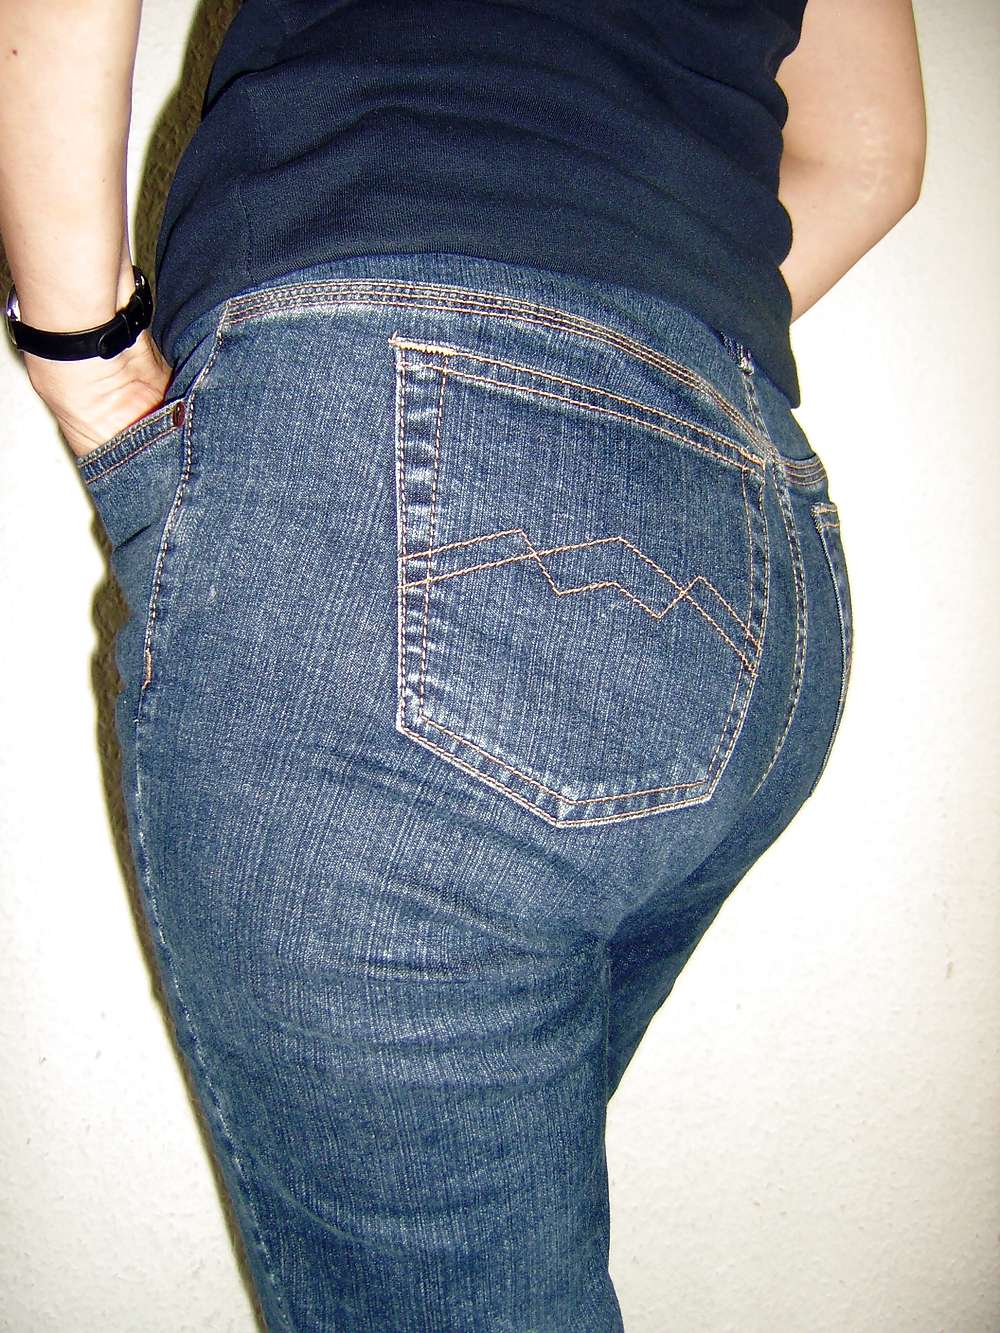 Big firm mature ass in jeans #22593400